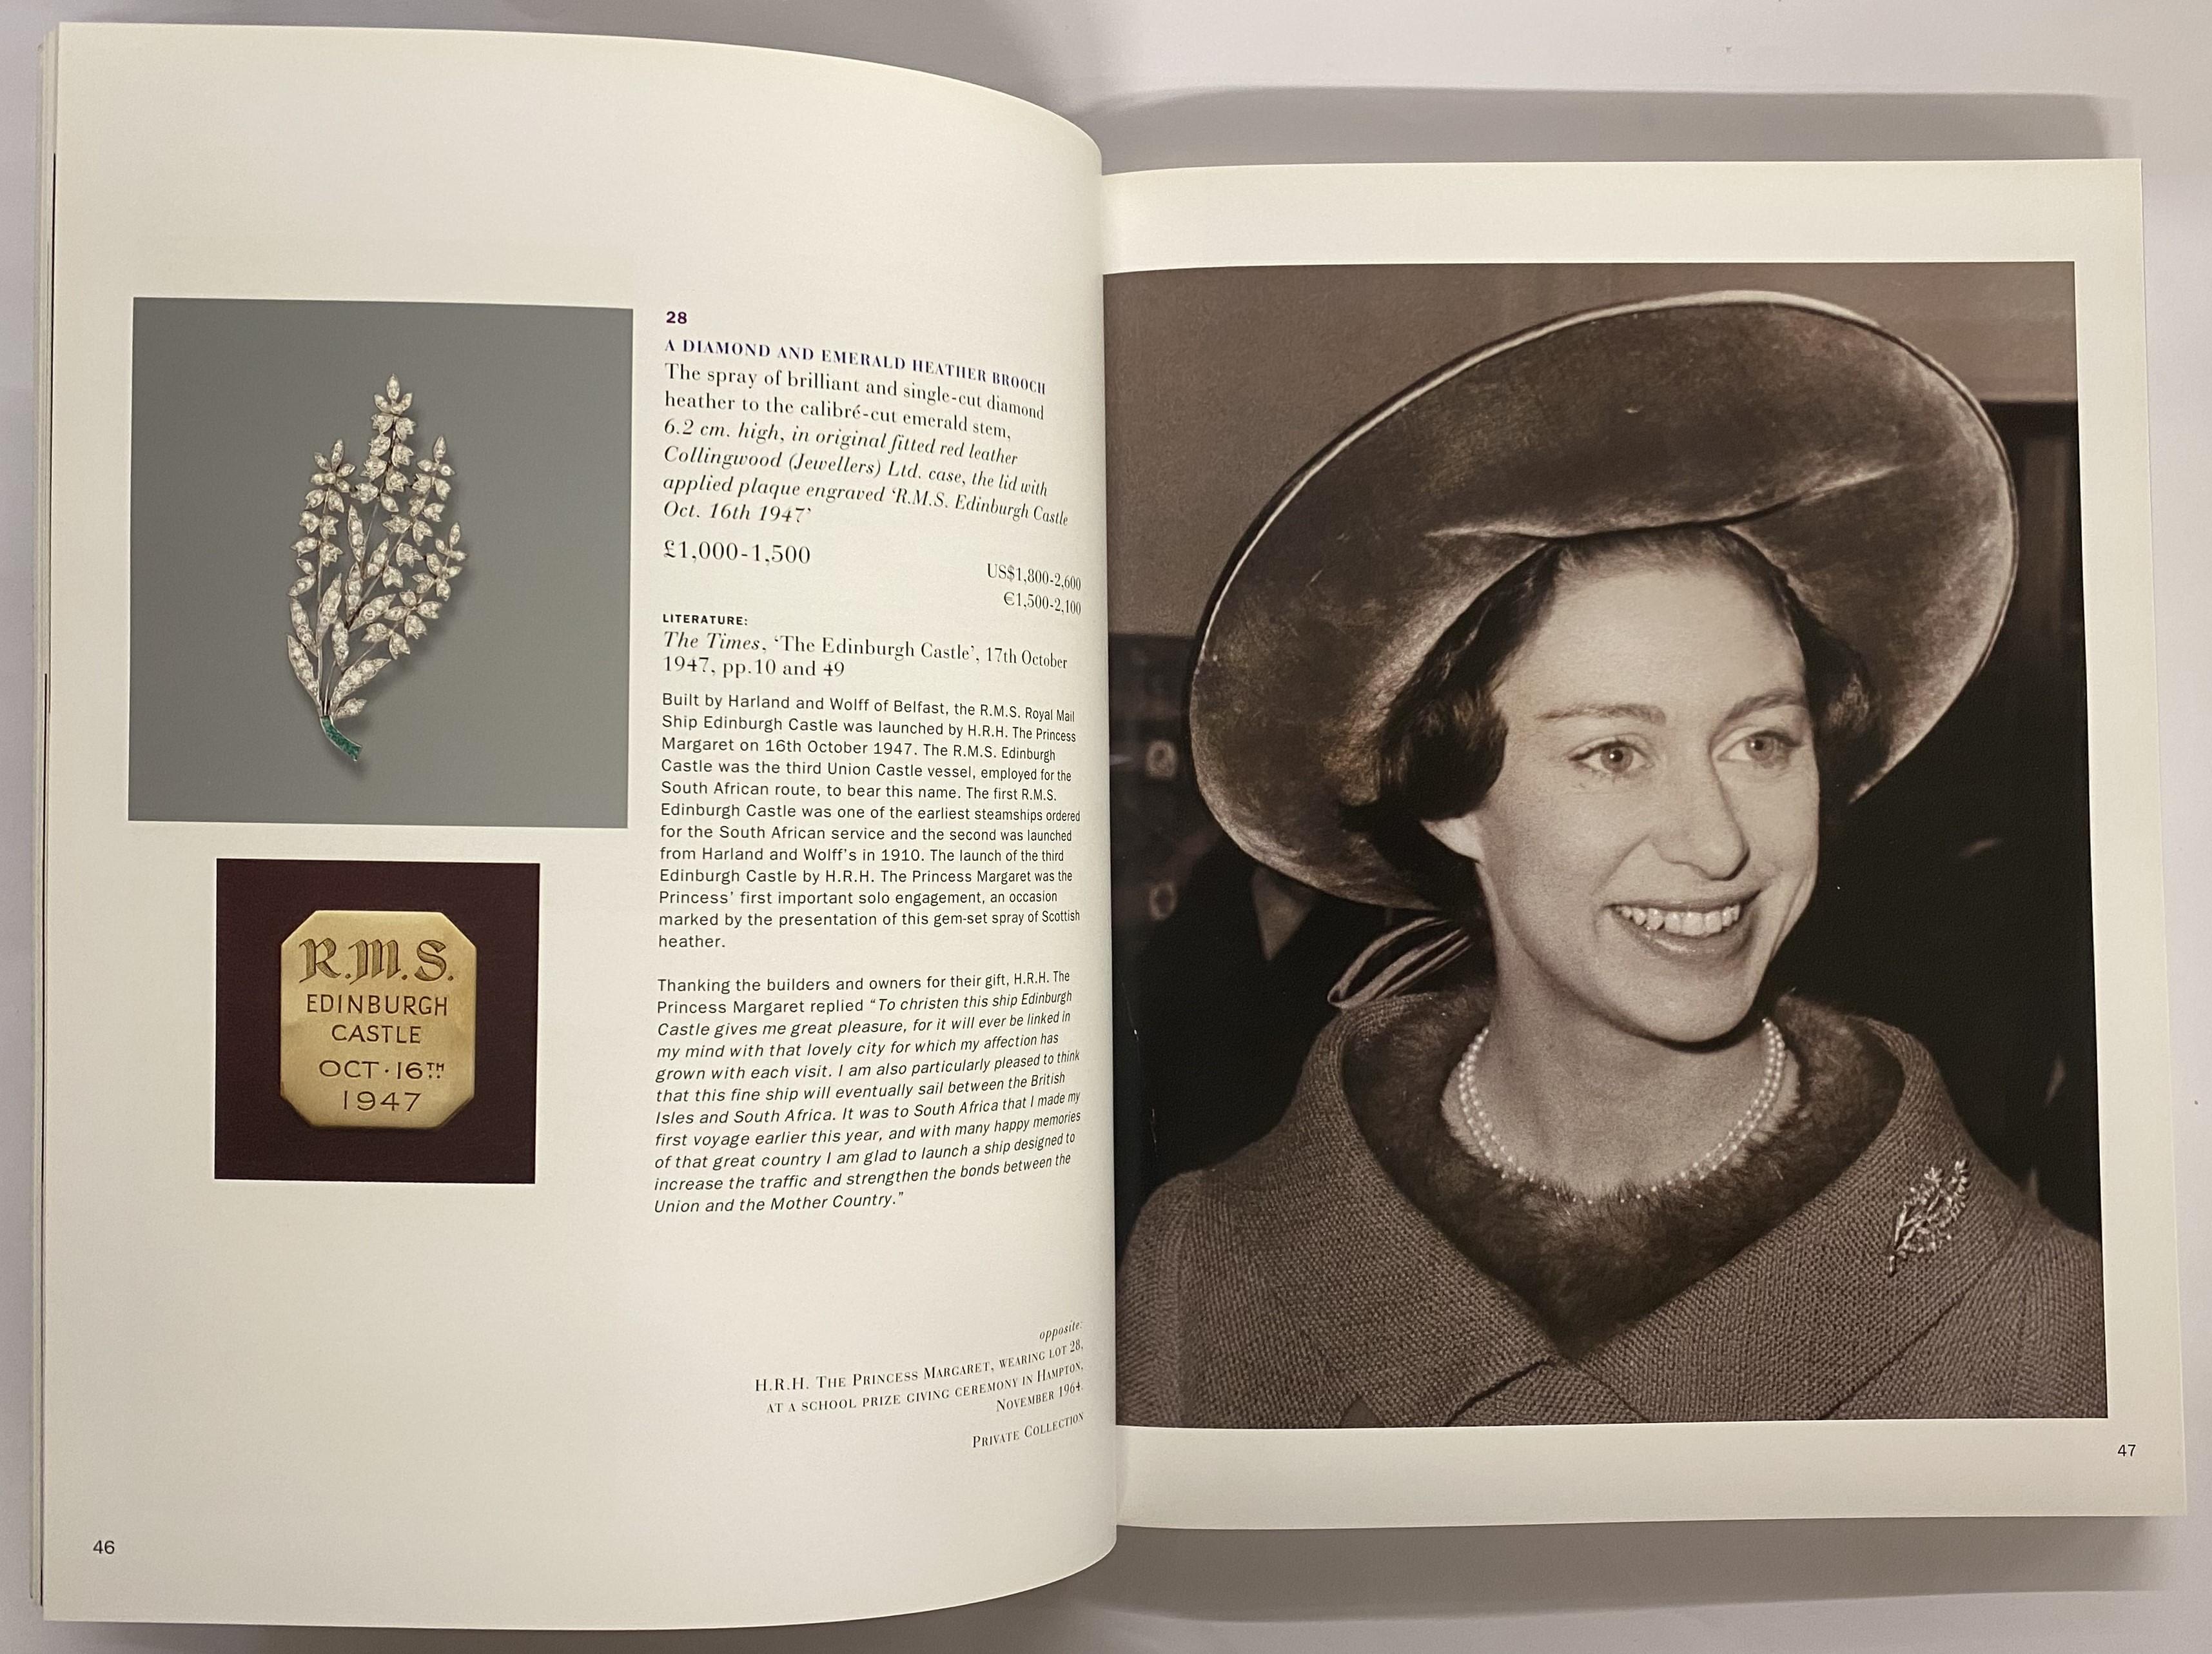 Countess of Snowden. (continued from title)
This is the two volume set of sales catalogues produced by Christie's for the sale of Princess Margaret's collection of personal effects. The sale took place on Tuesday 13th June and Wednesday 14th June